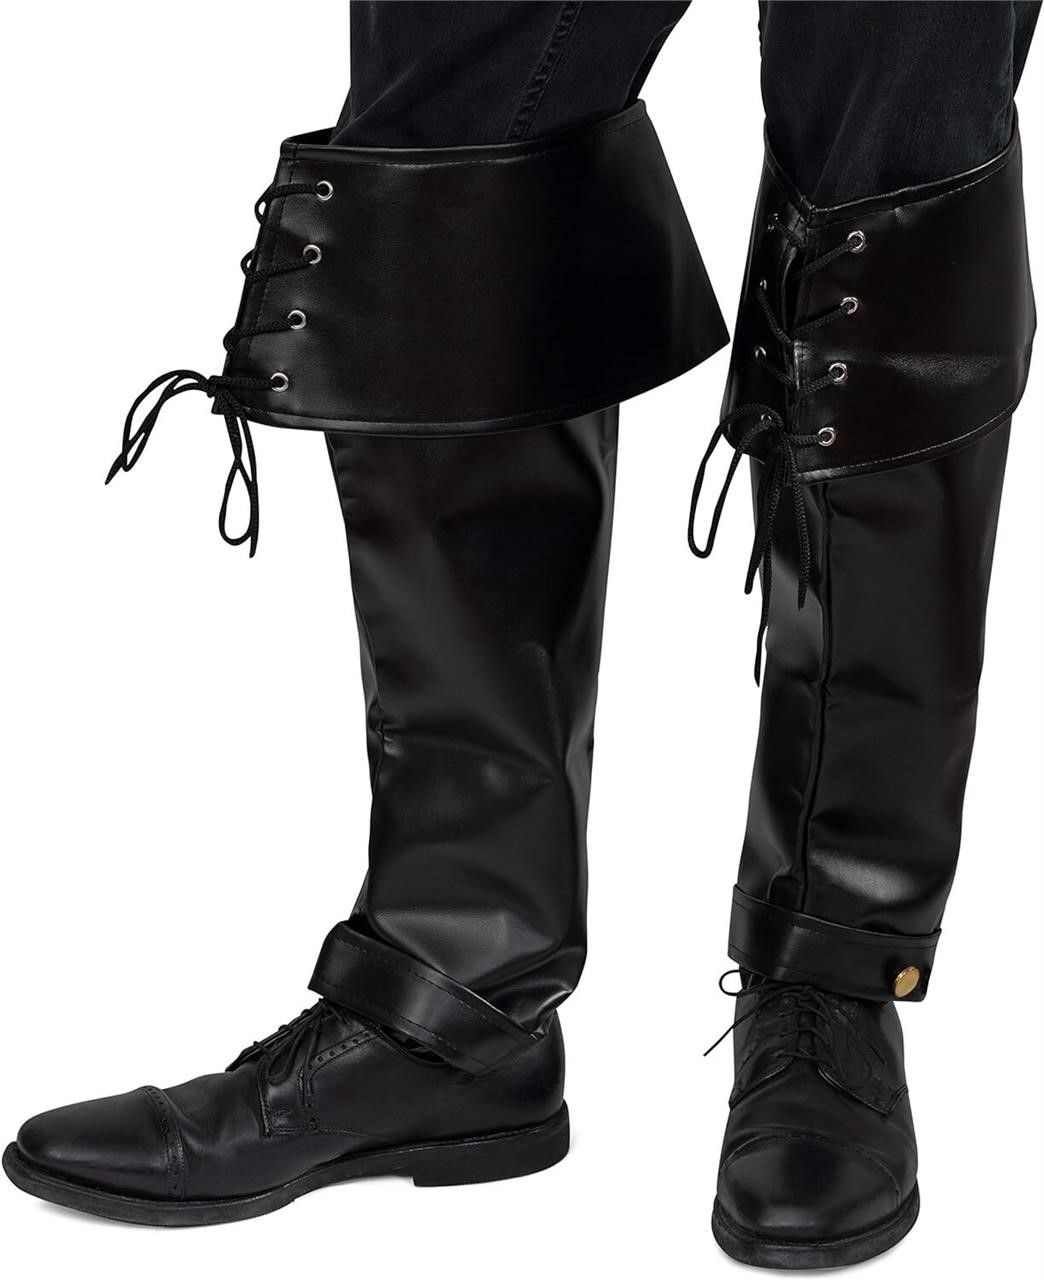 Skeleteen Faux Pirate Boots - Over Shoe